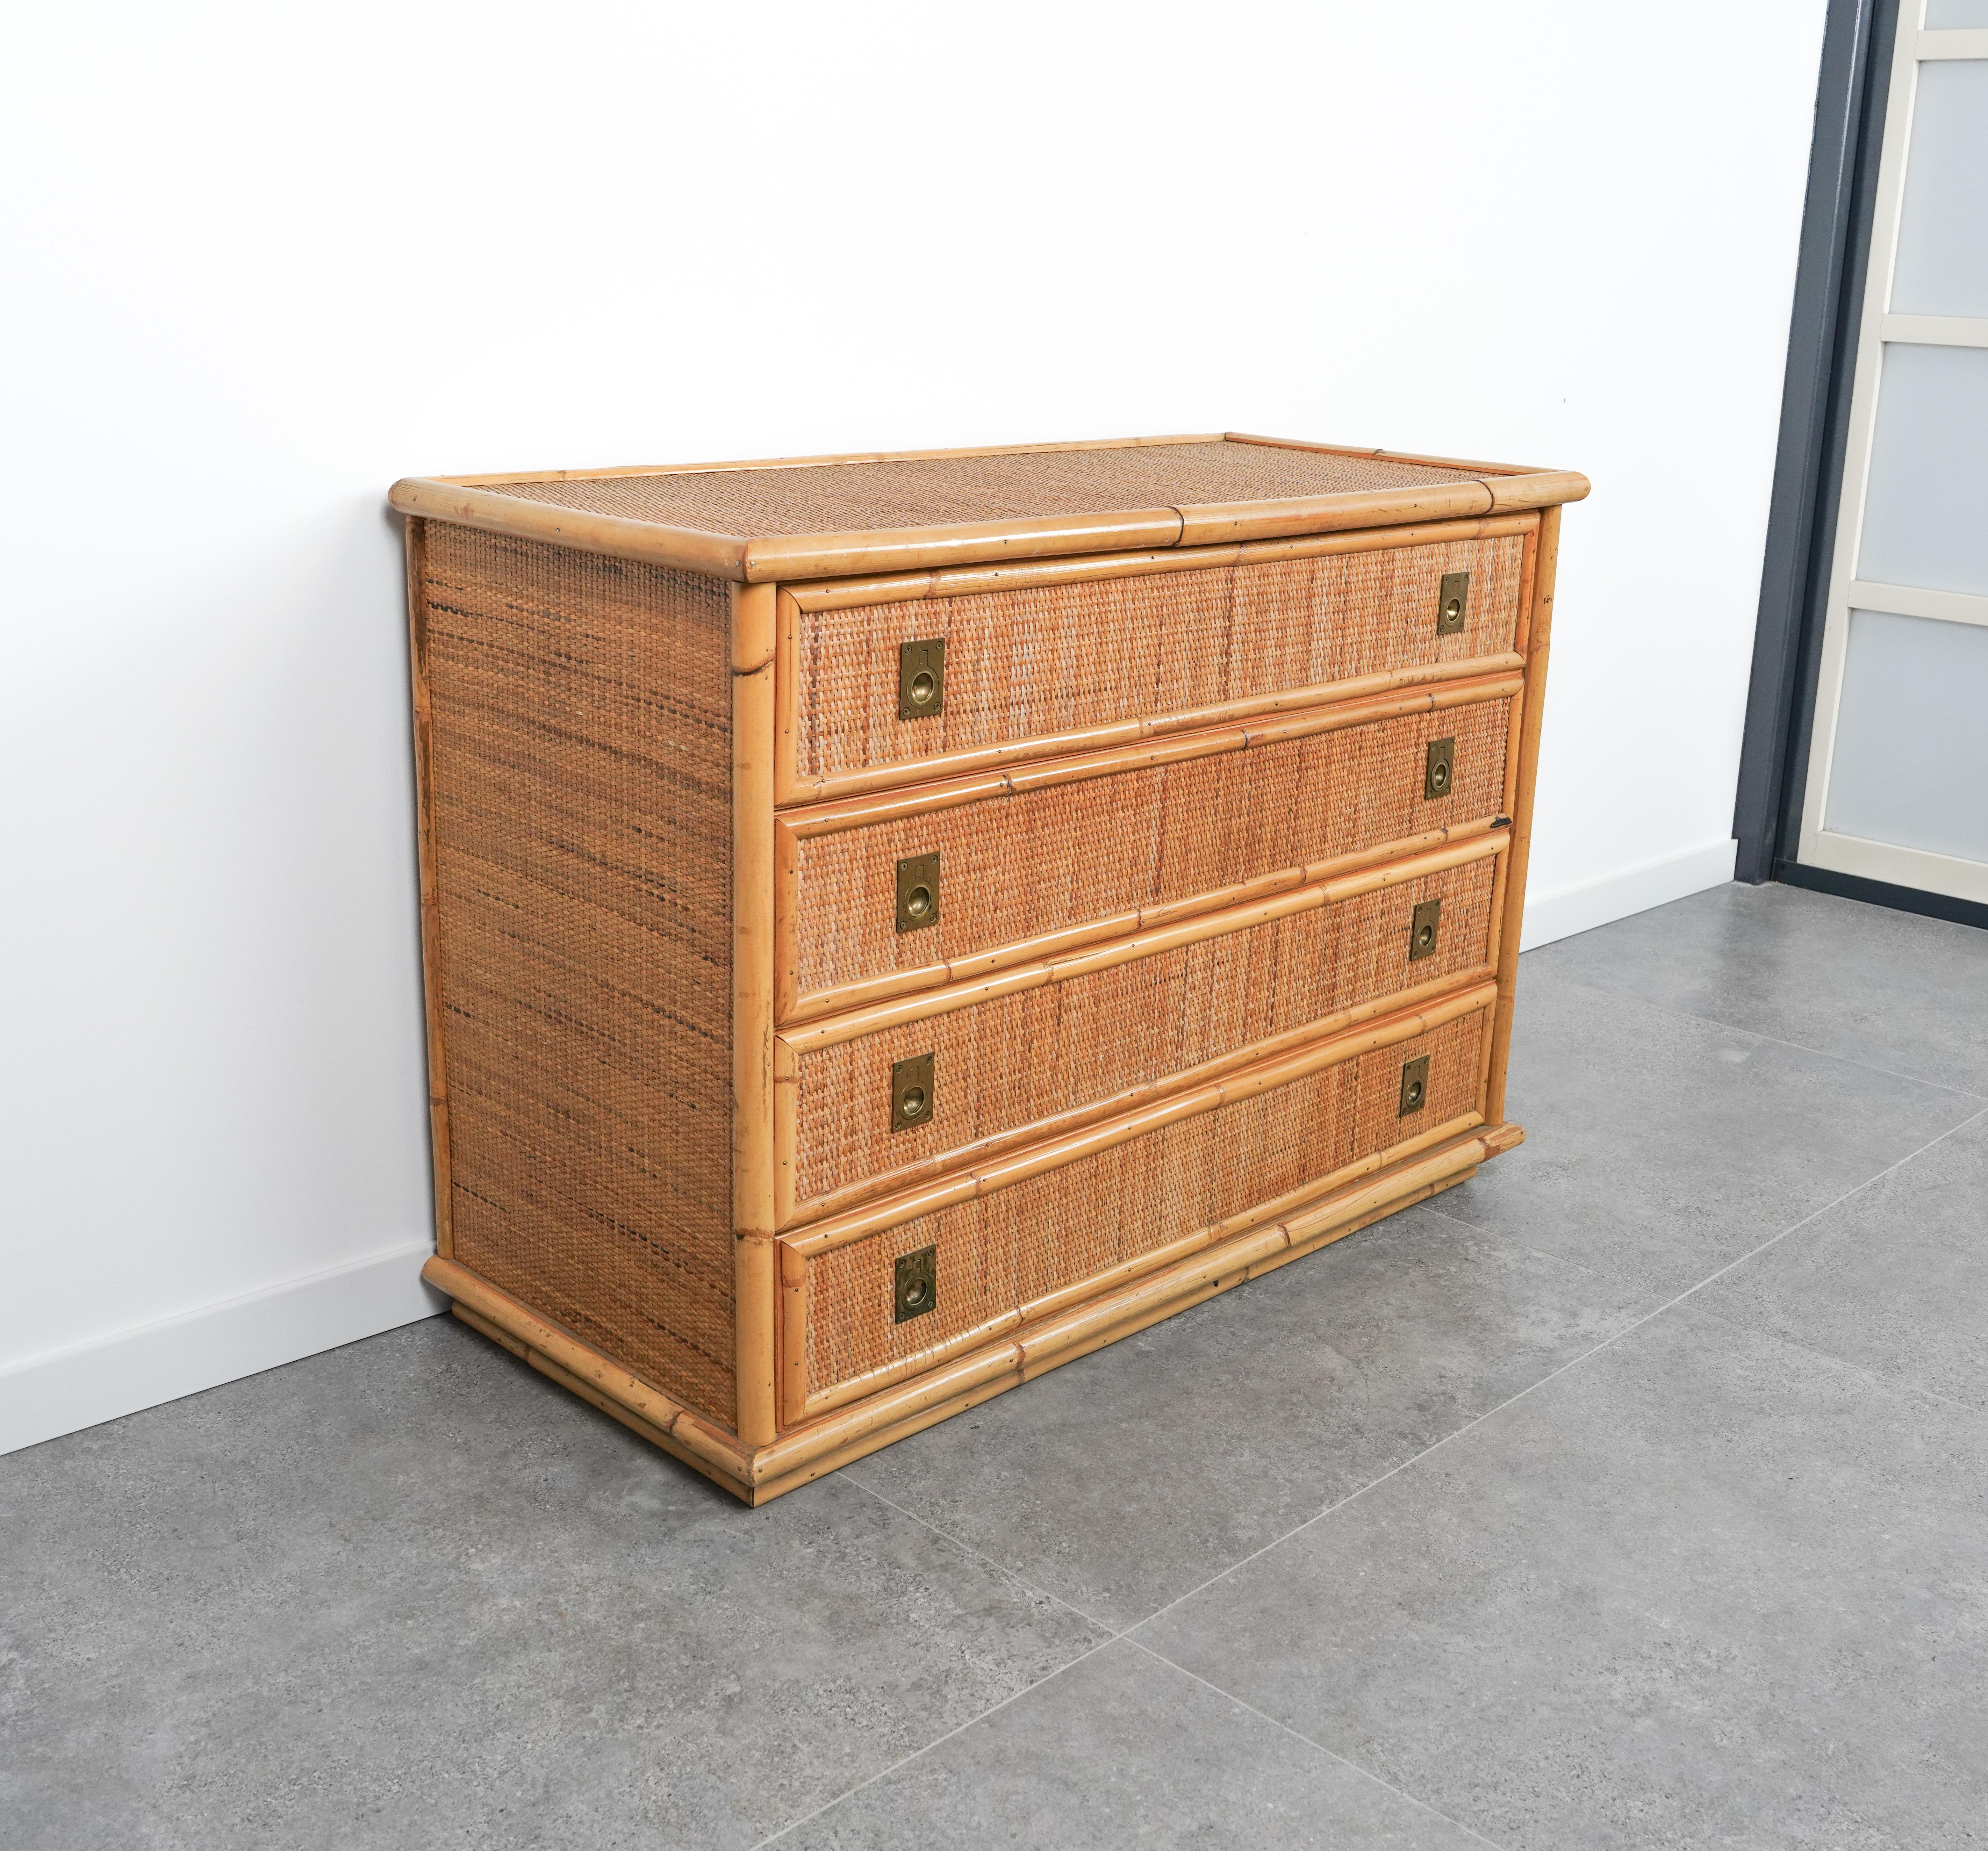 Italian Midcentury Bamboo, Rattan and Brass Chest of Drawers by Dal Vera, Italy, 1970s